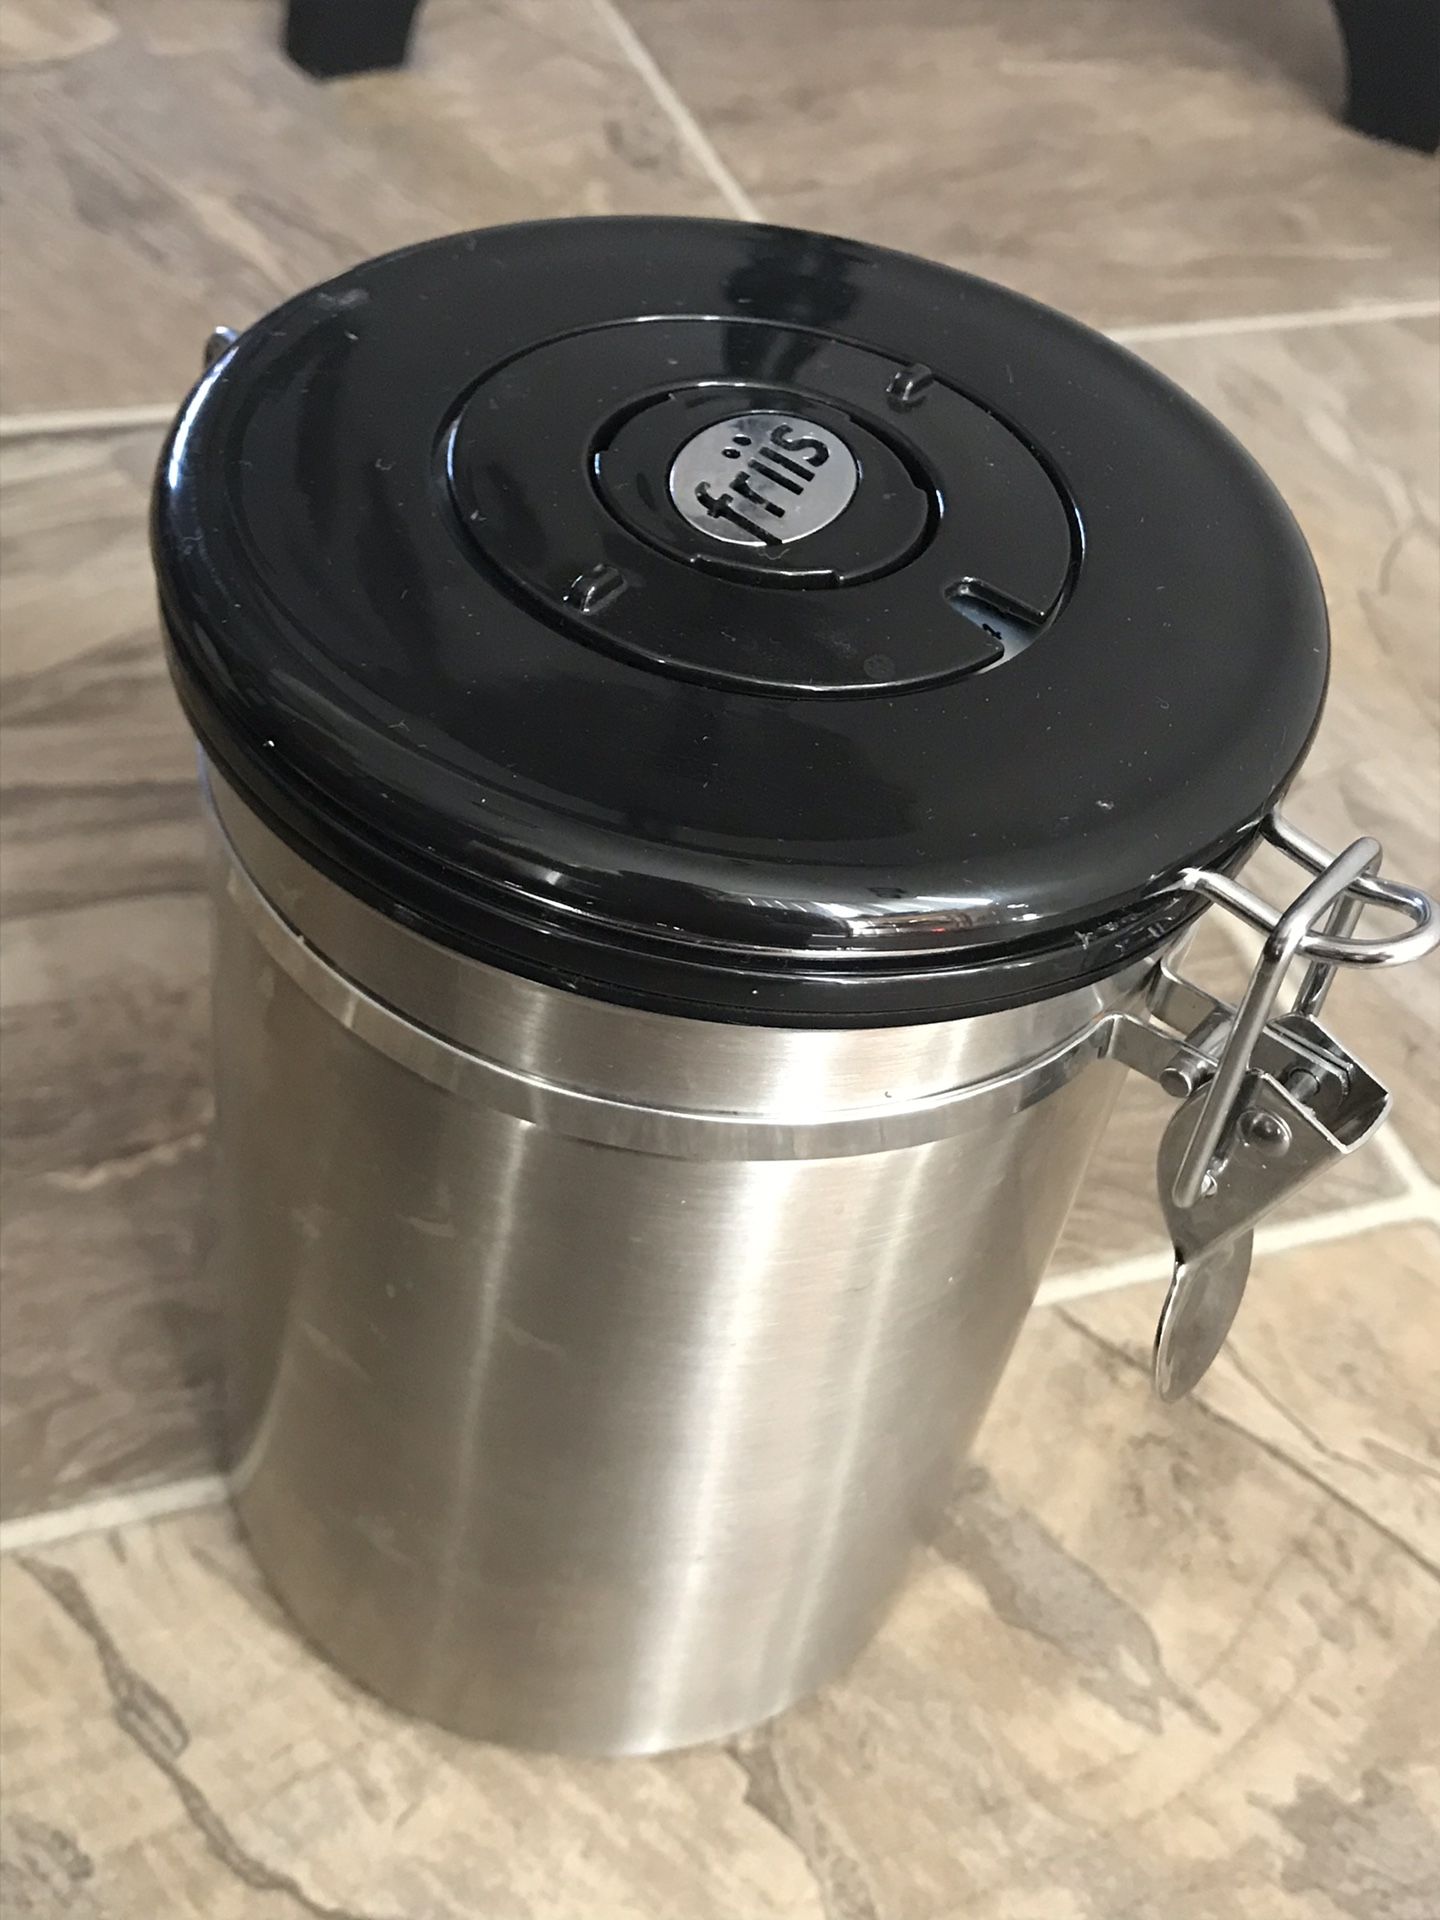 Friis coffee canister